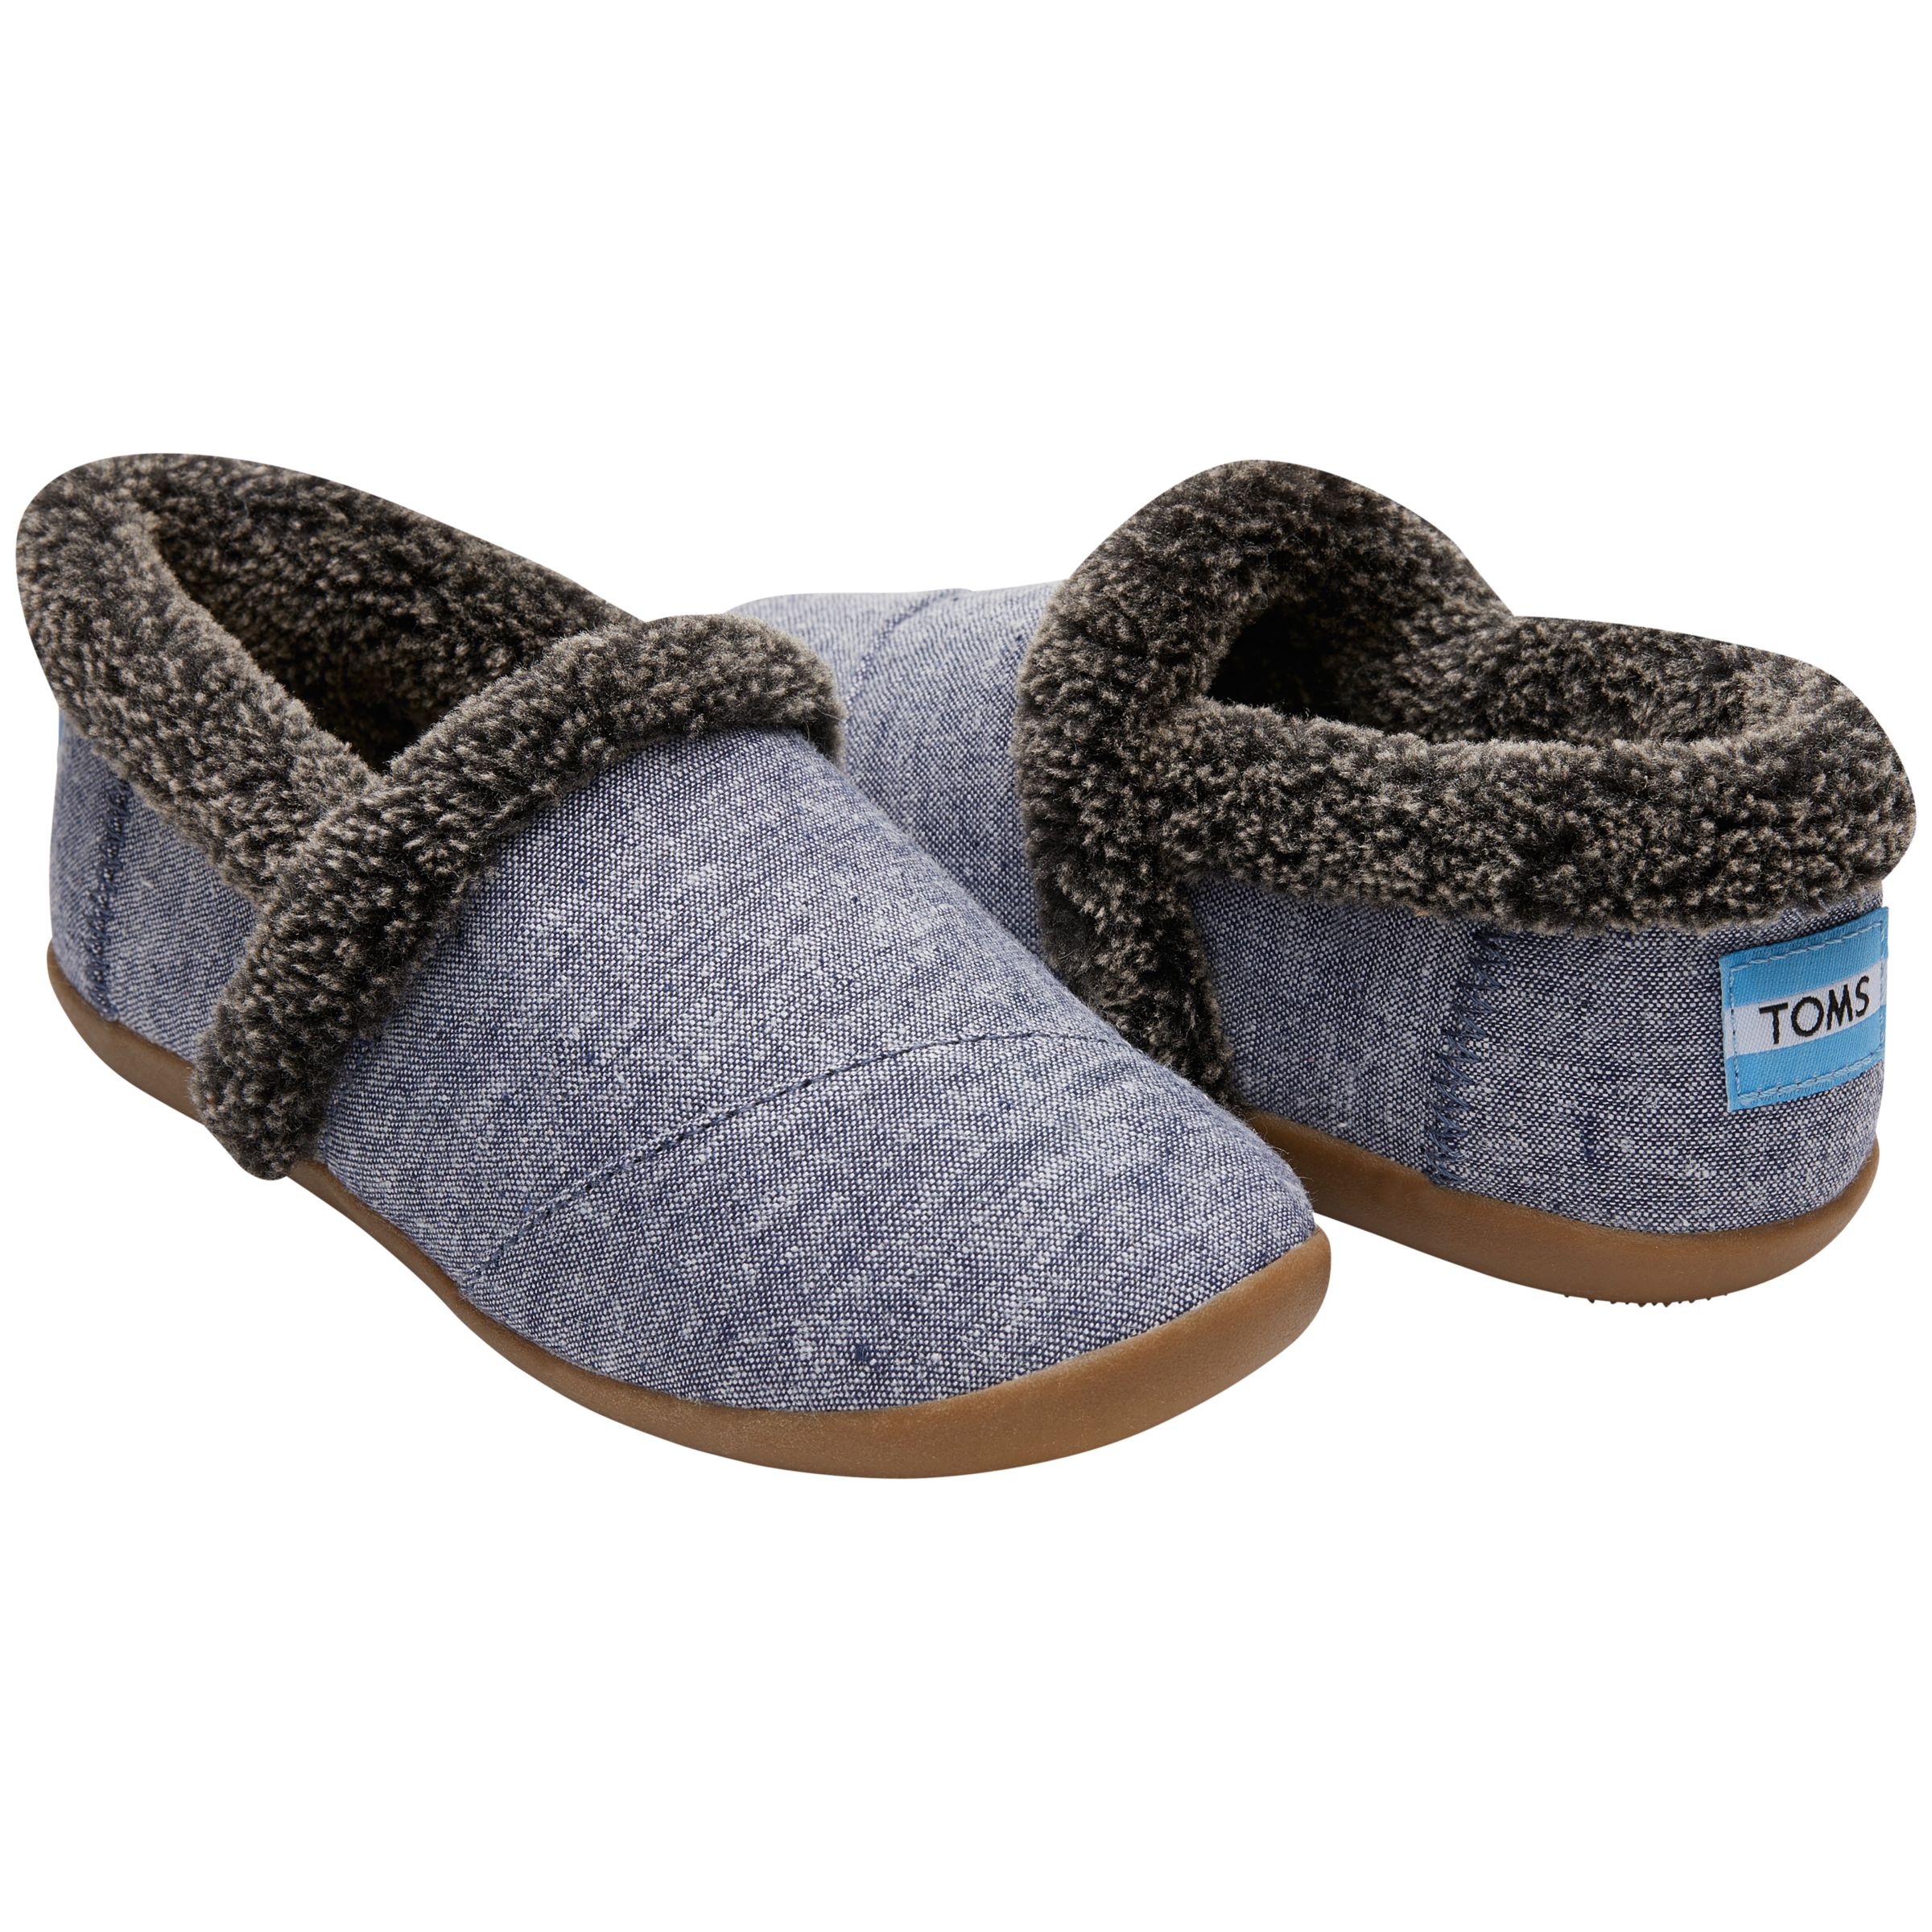 TOMS House Slippers | Chambray at John Lewis & Partners